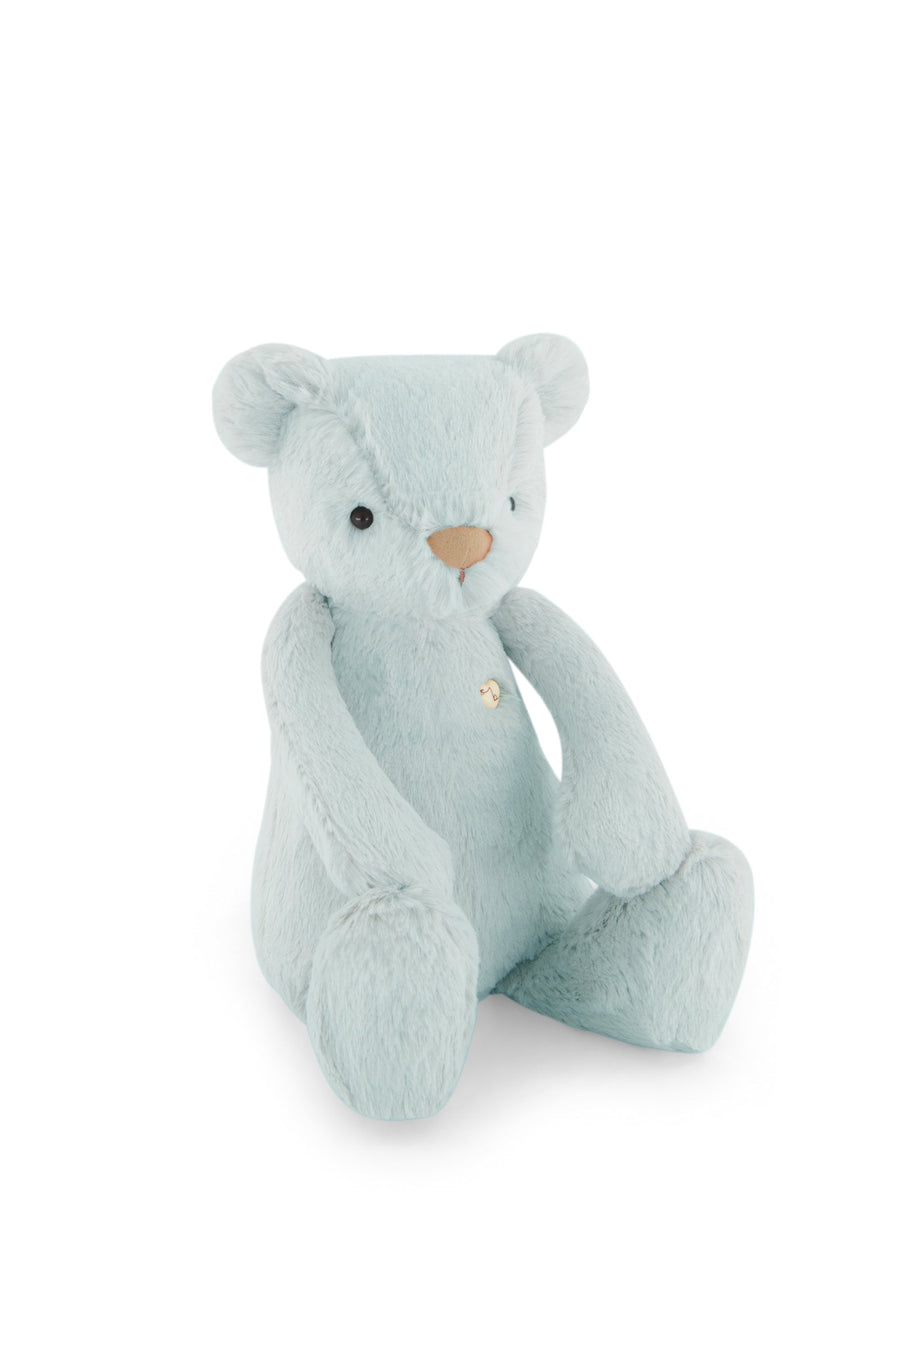 Snuggle Bunnies - George the Bear - Sprout Childrens Toy from Jamie Kay NZ